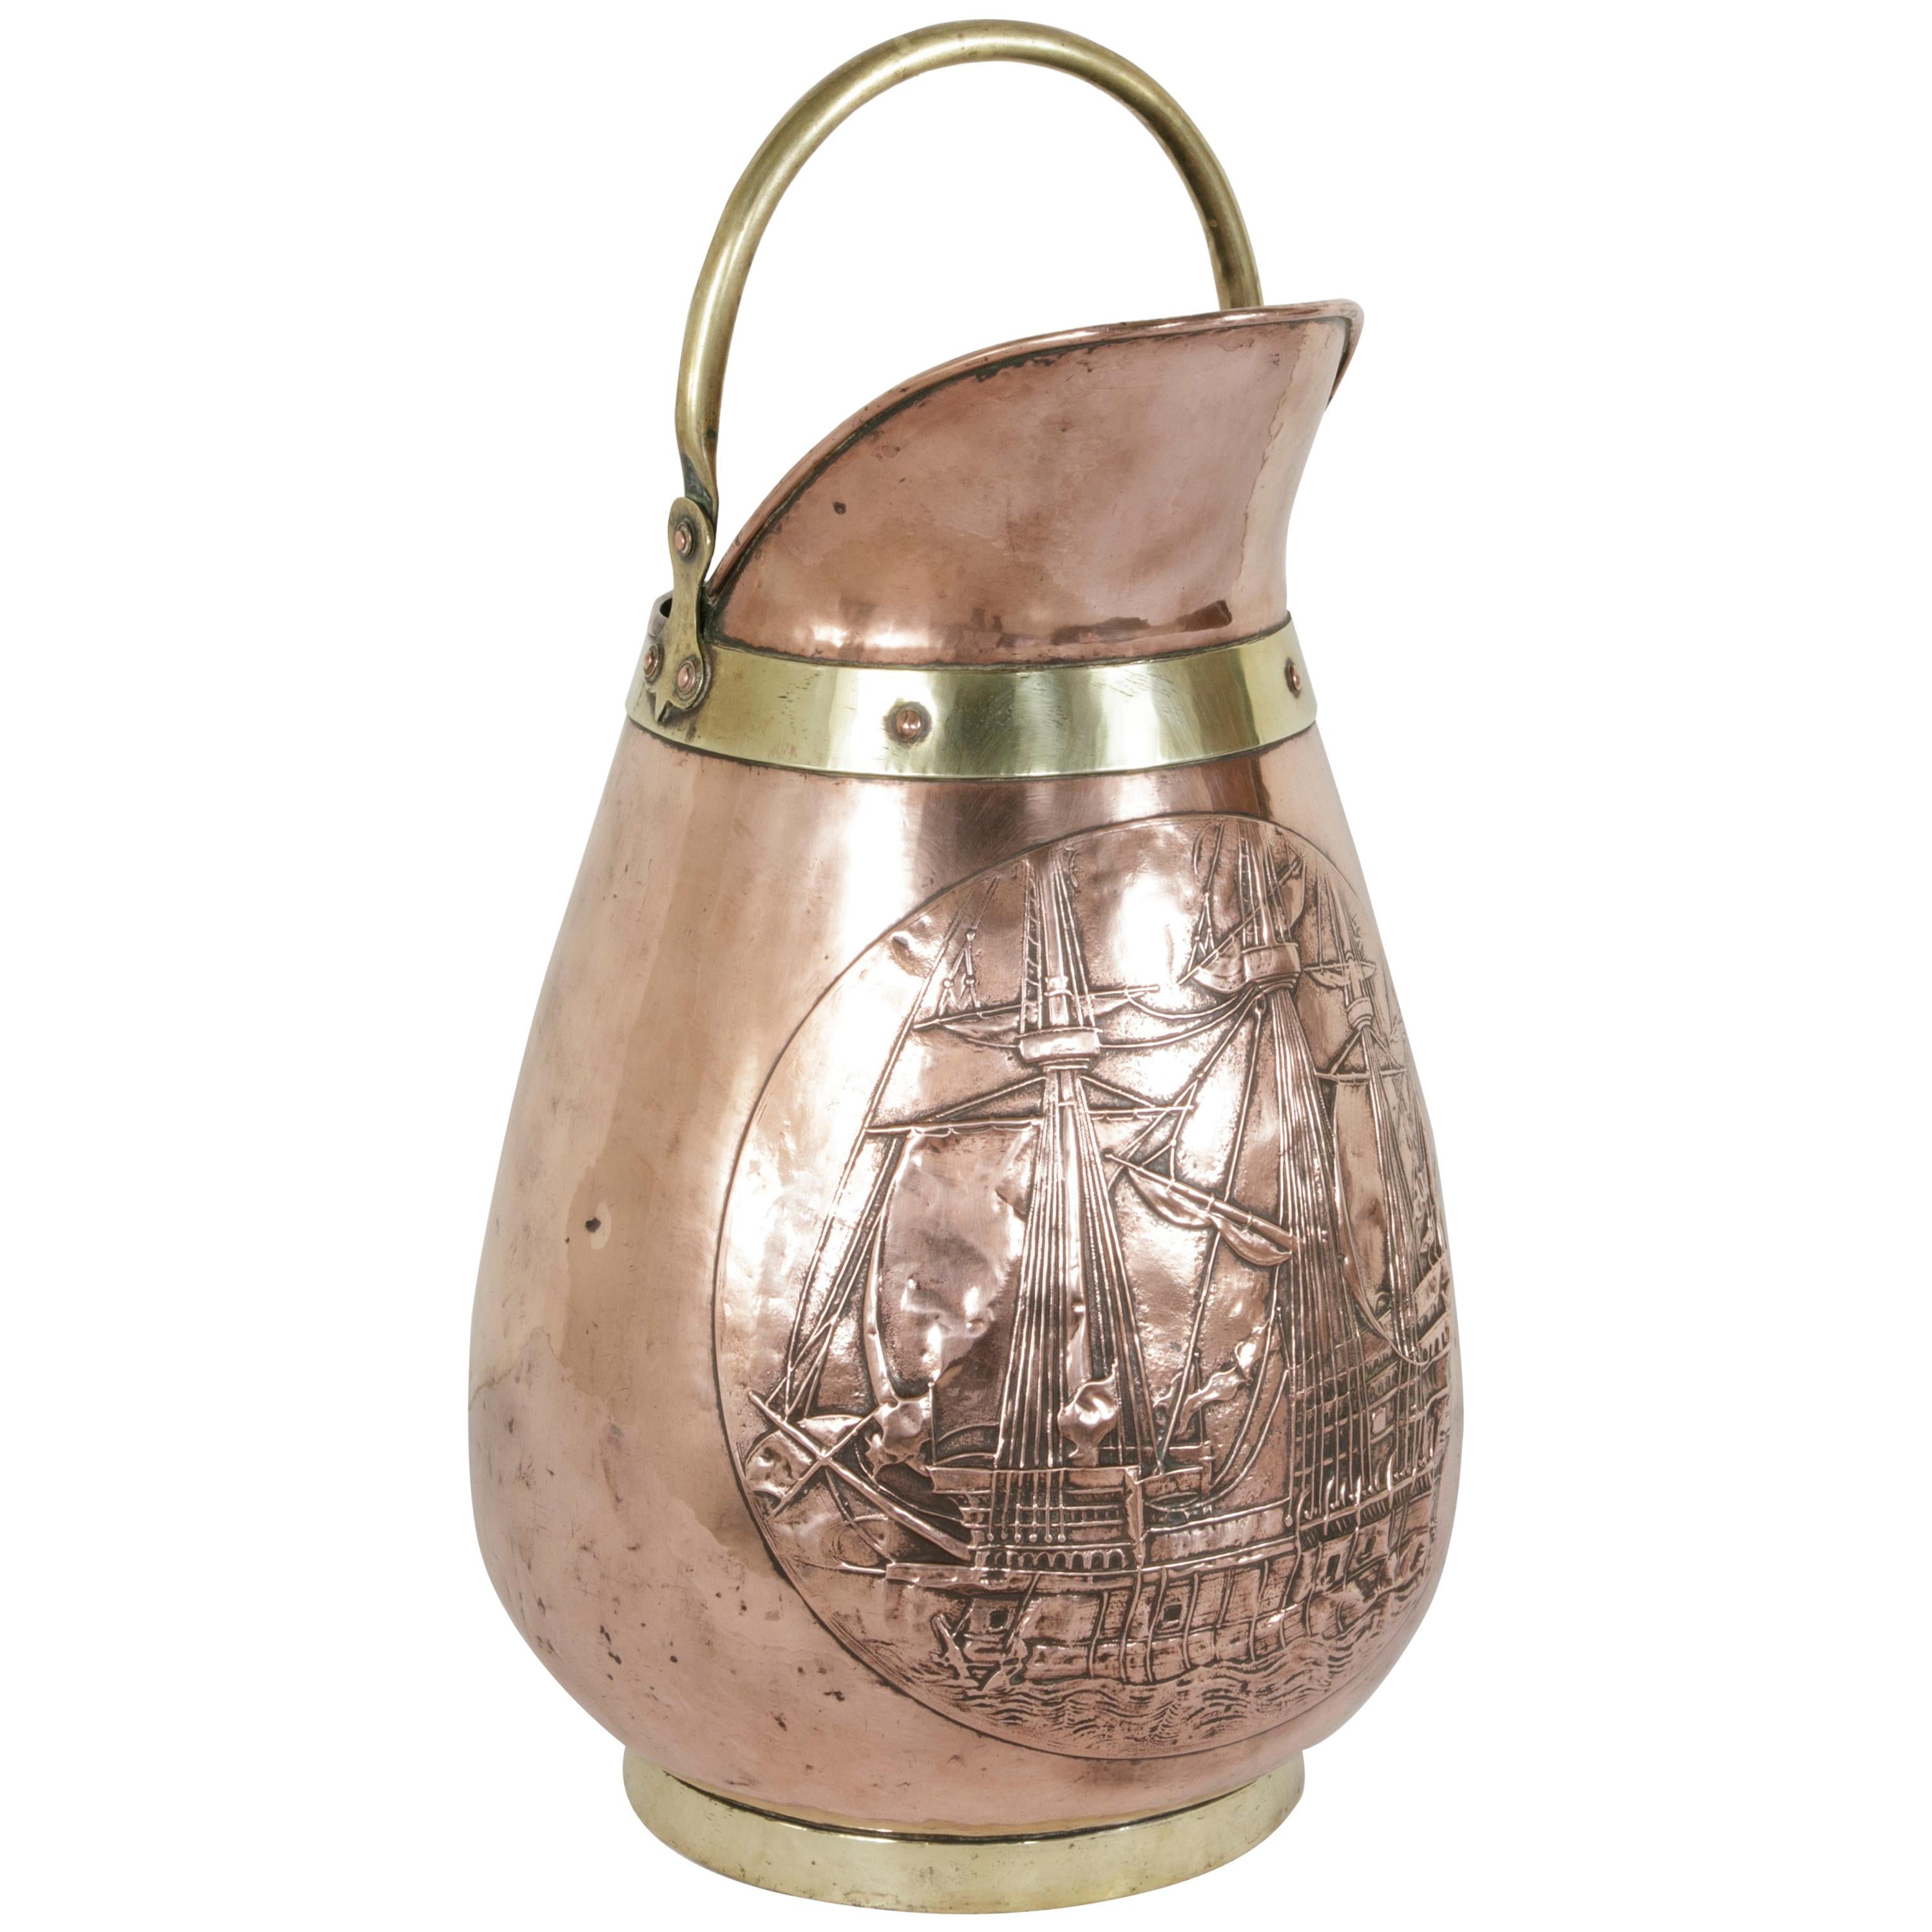 Large Copper Repousse Pitcher or Umbrella Stand with Nautical Galleon Motif